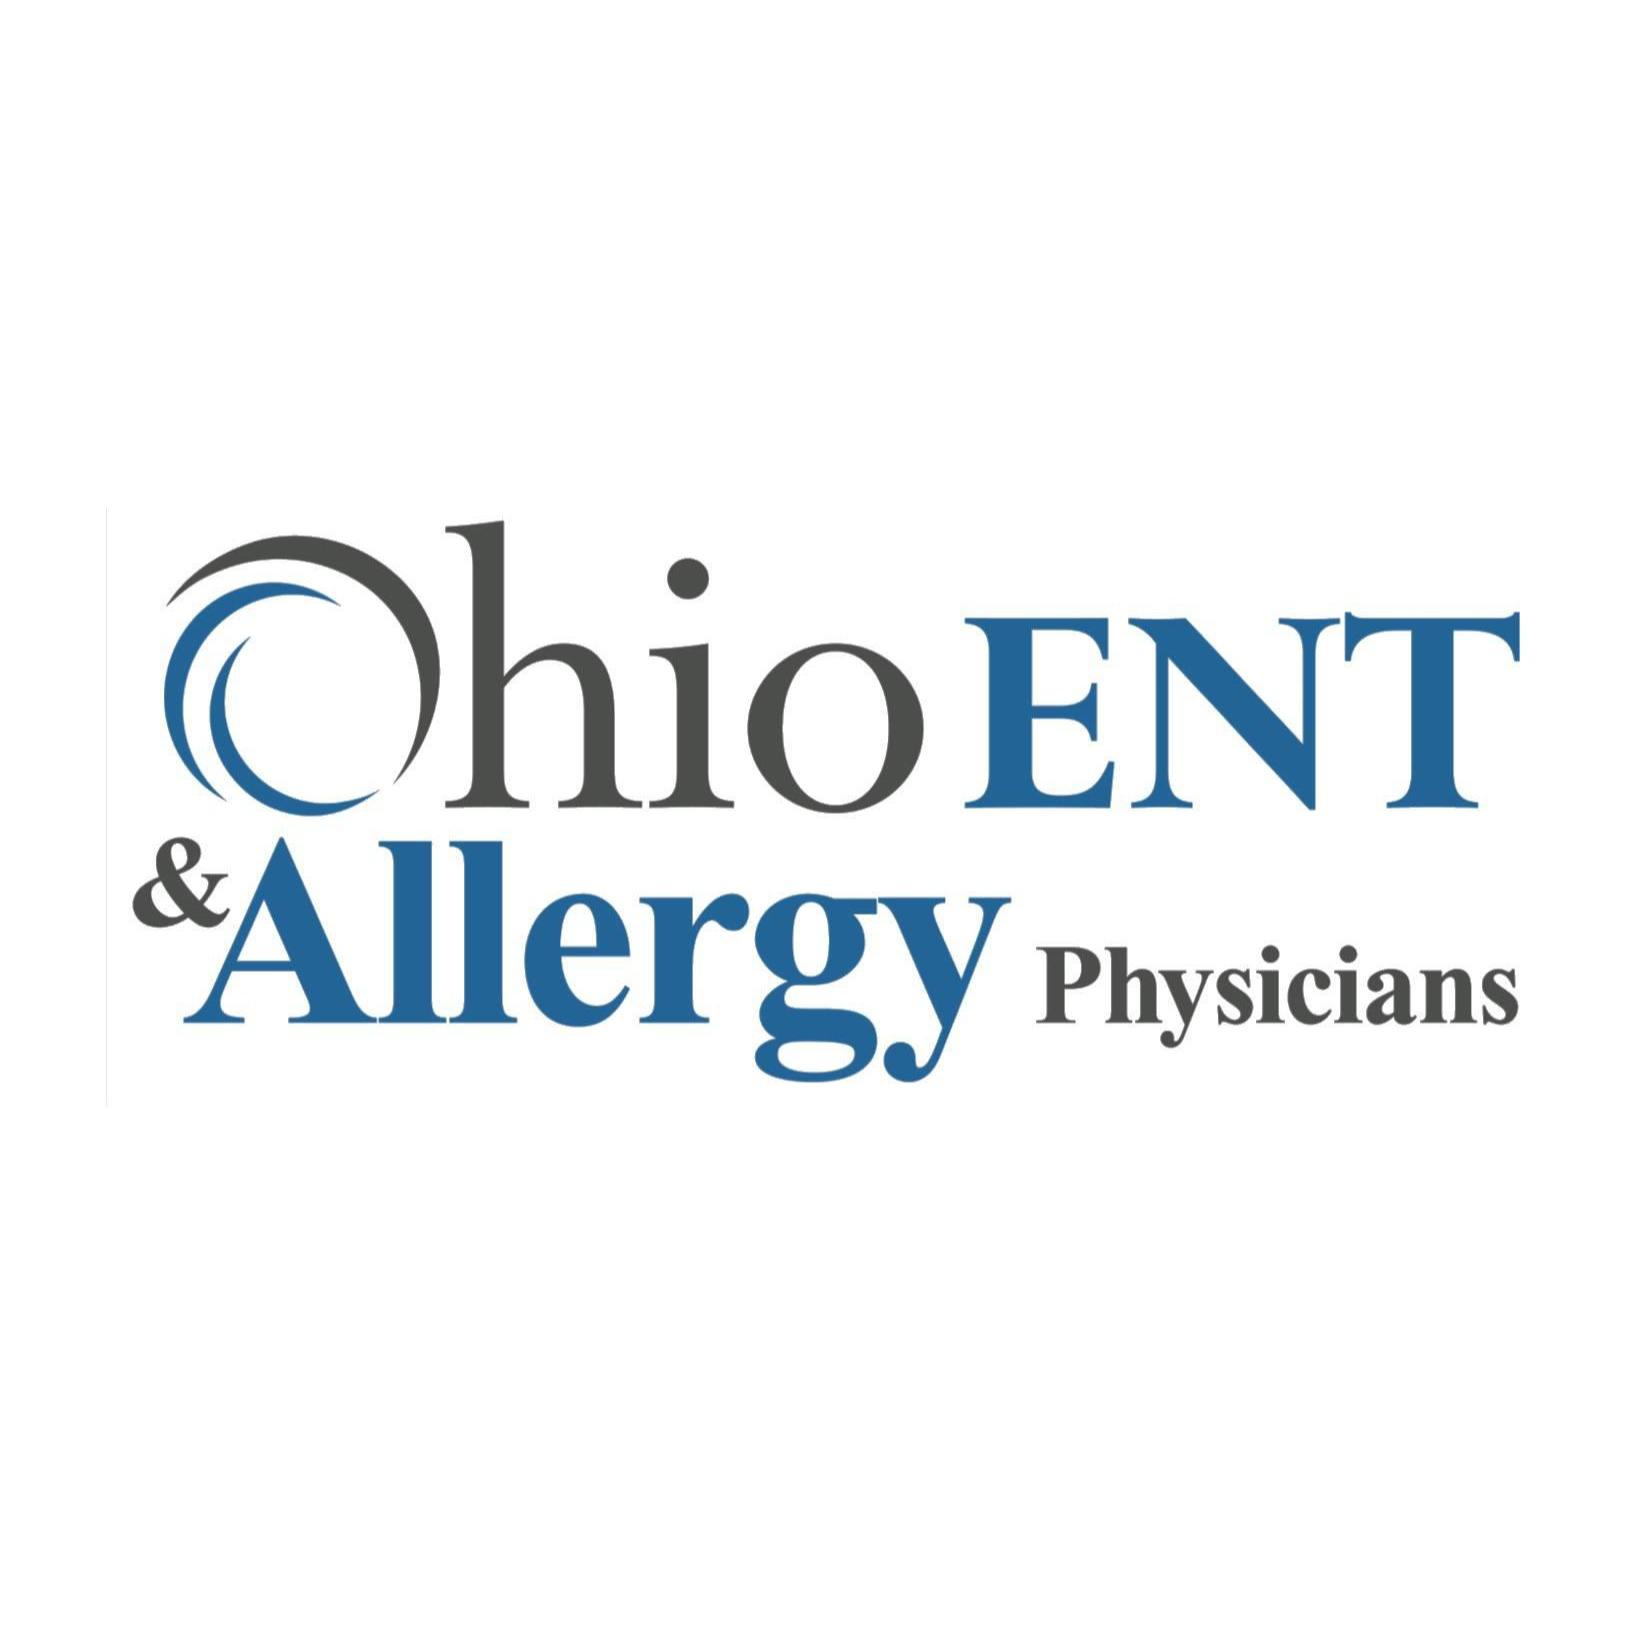 Ohio ENT & Allergy Physicians - Delaware, OH 43015 - (740)368-5588 | ShowMeLocal.com